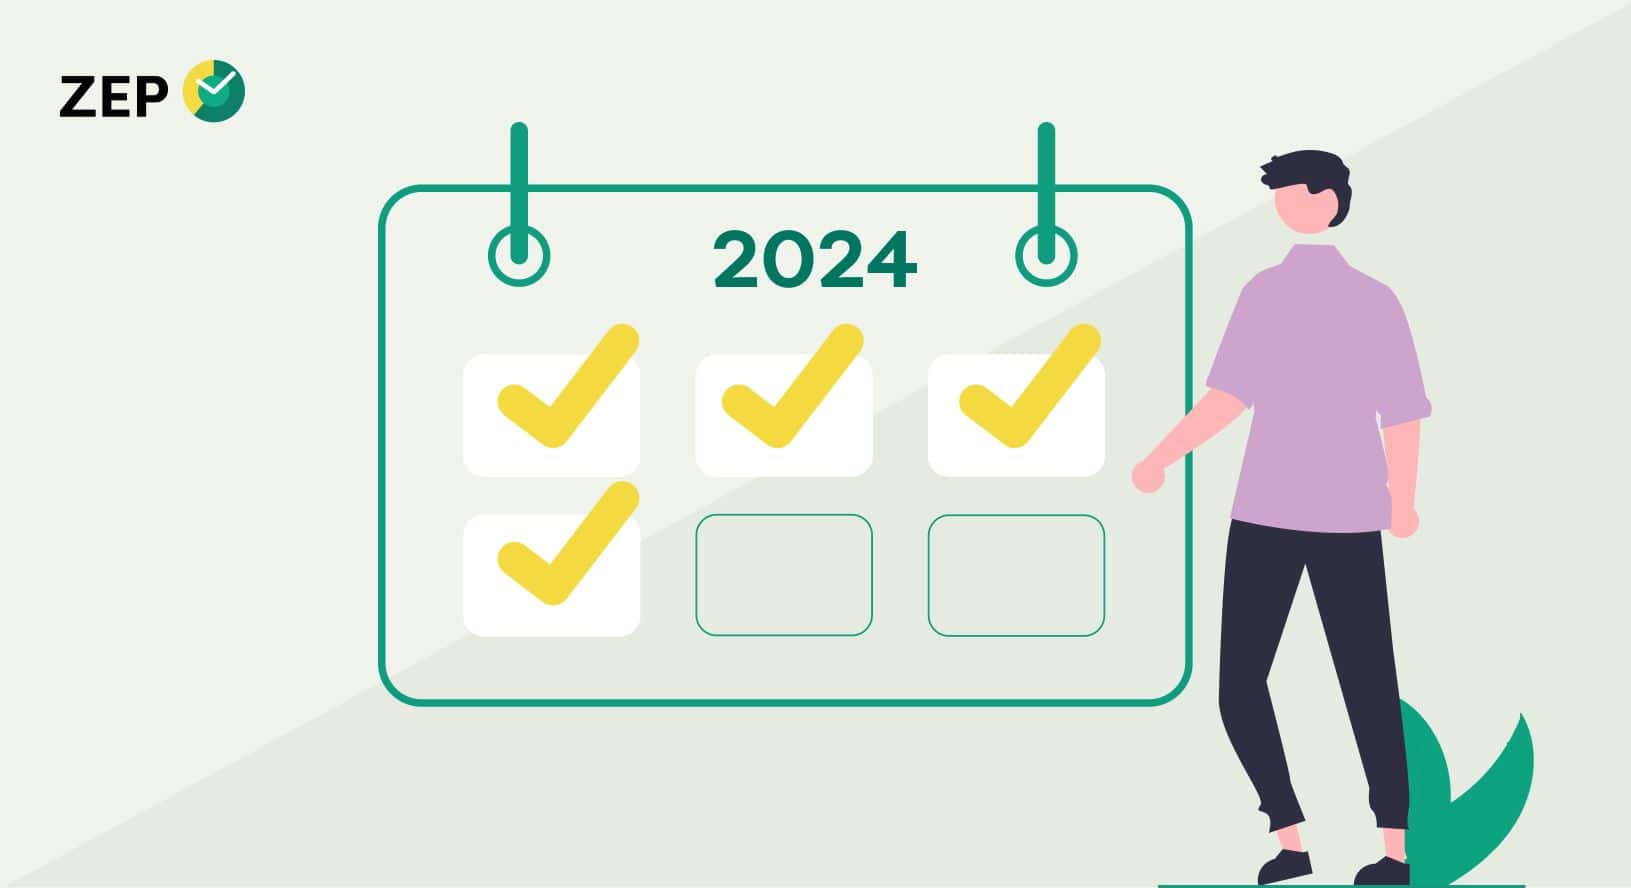 Important changes for employees in 2024 - what you need to know